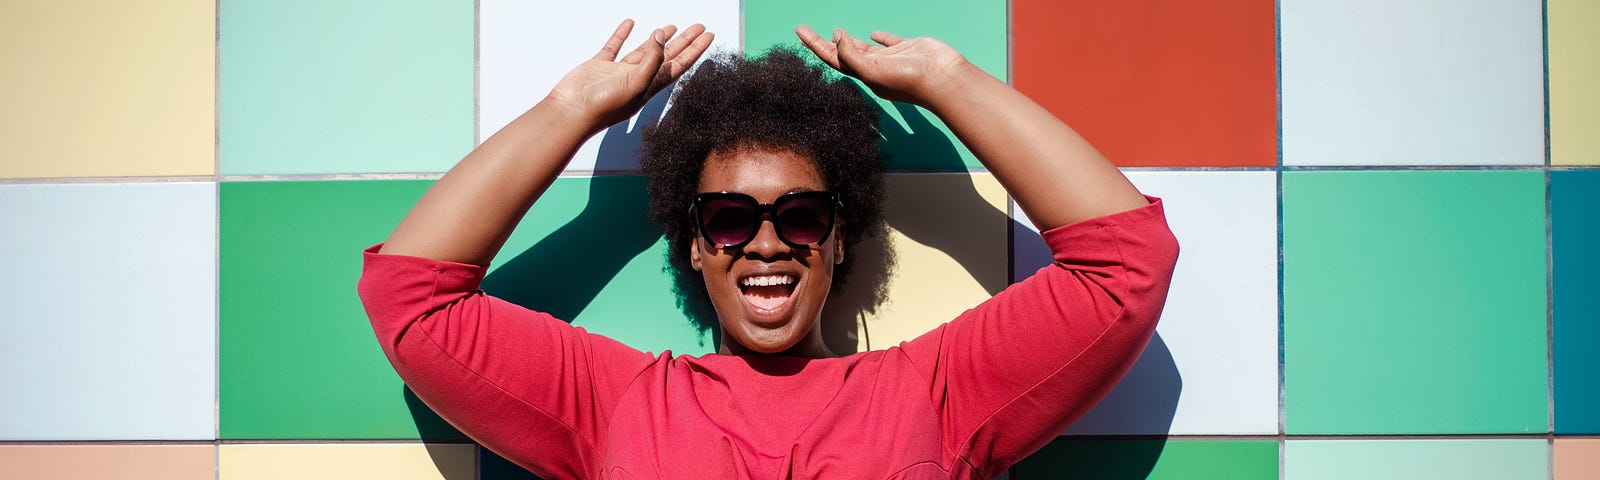 Stylish Black woman in sunglasses and red outfit posing in front of a colorful tiled wall.